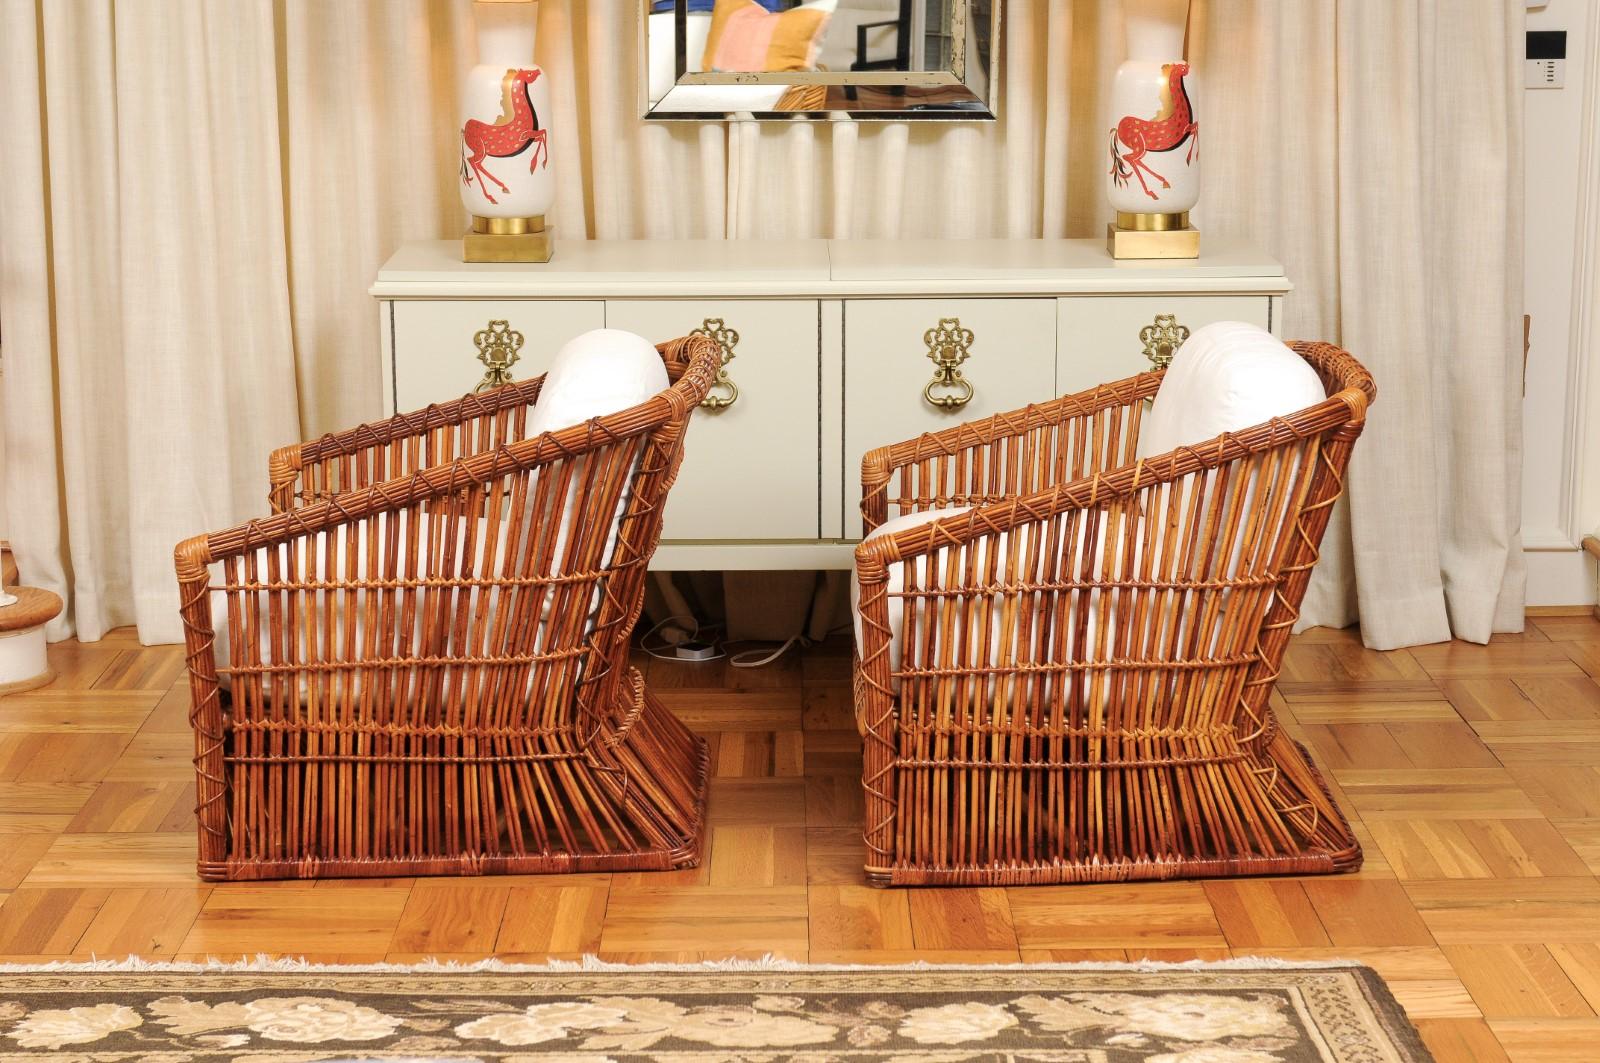 Exceptional Pair of Rattan and Cane Basket Loungers by McGuire, Circa 1975 For Sale 4